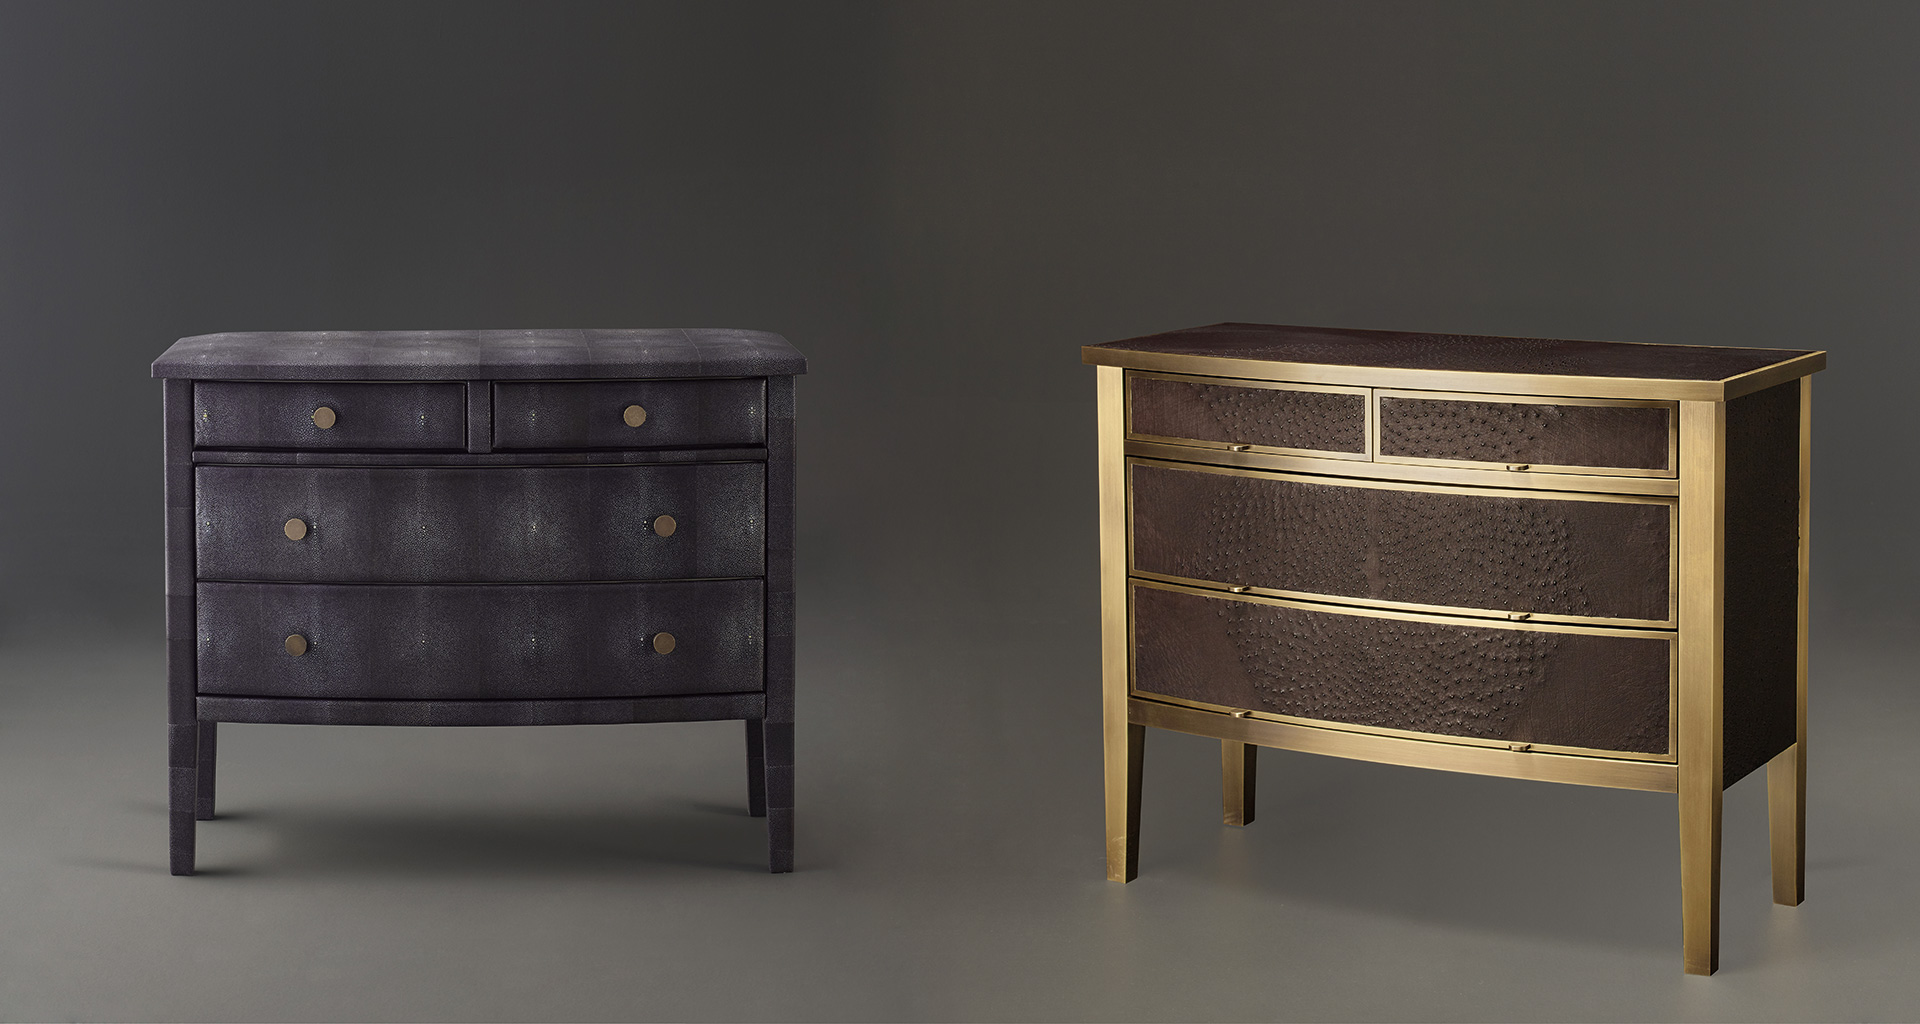 Cassettiera '700 is a wooden chest of drawers covered in leather or galuchat with bronze knobs, from Promemoria's catalogue | Promemoria